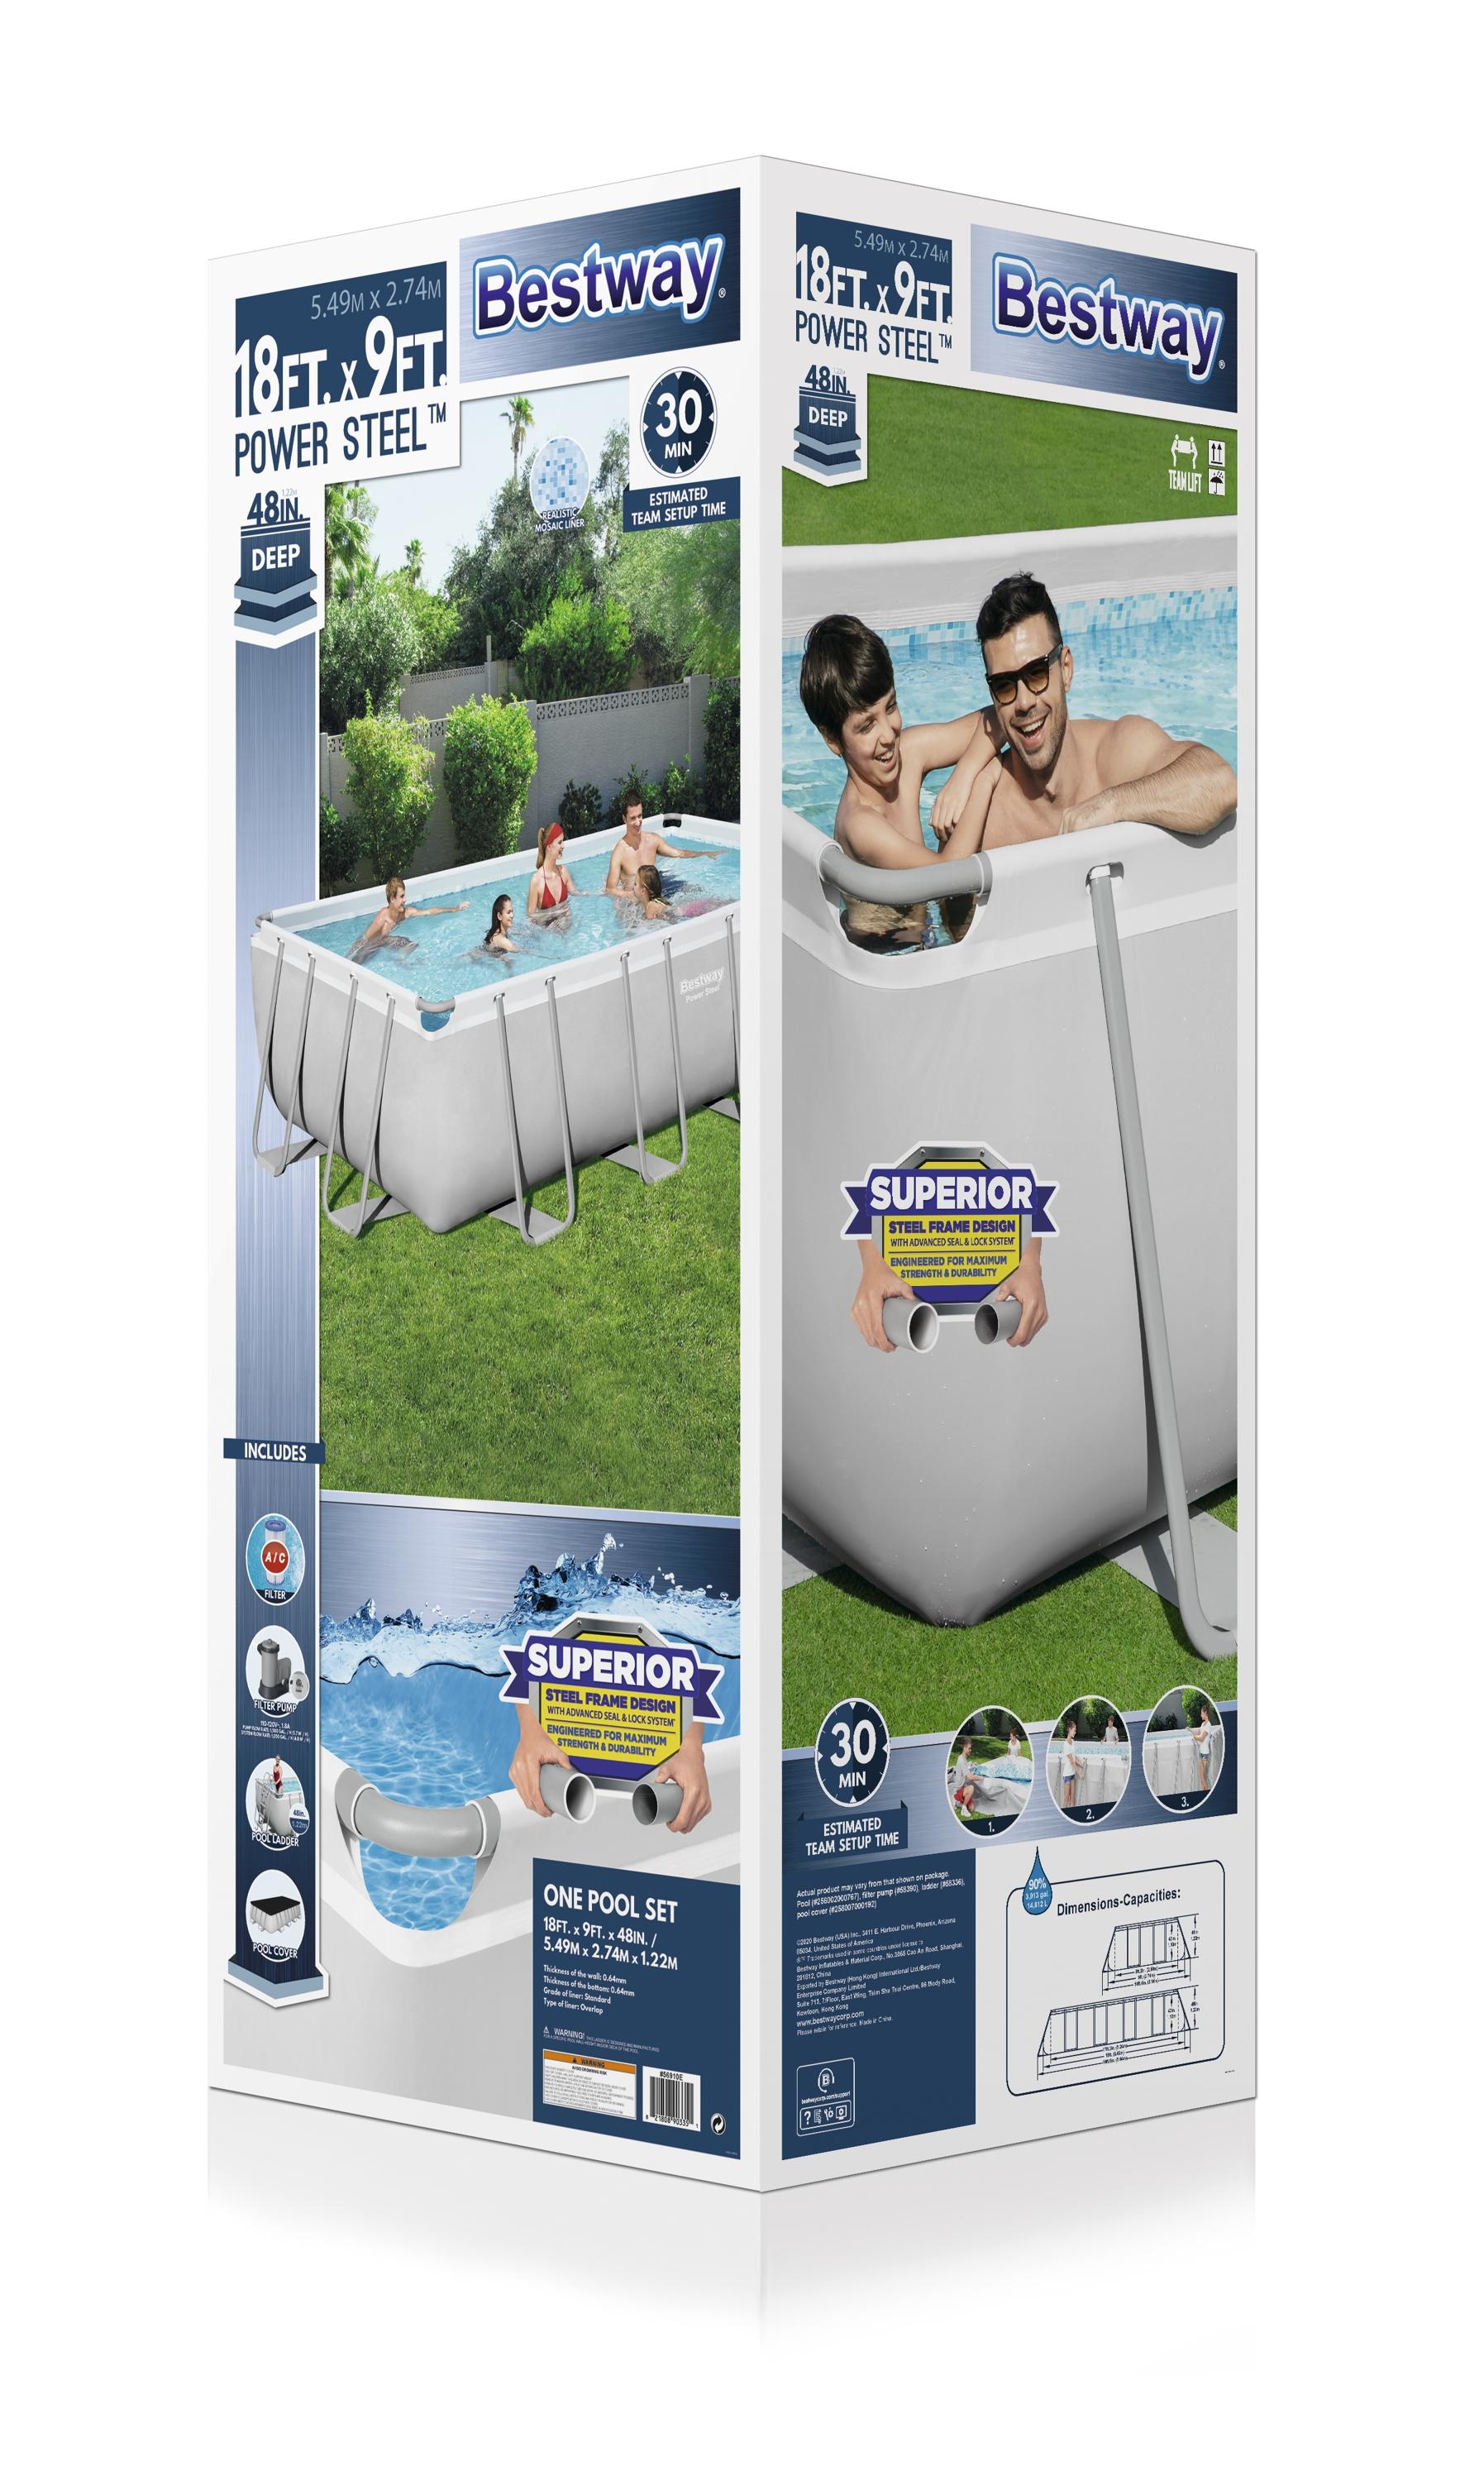 Bestway Power Steel 18' x 9' x 48" Rectangular Metal Frame Swimming Pool Set with Pump, Ladder and Cover - image 3 of 8